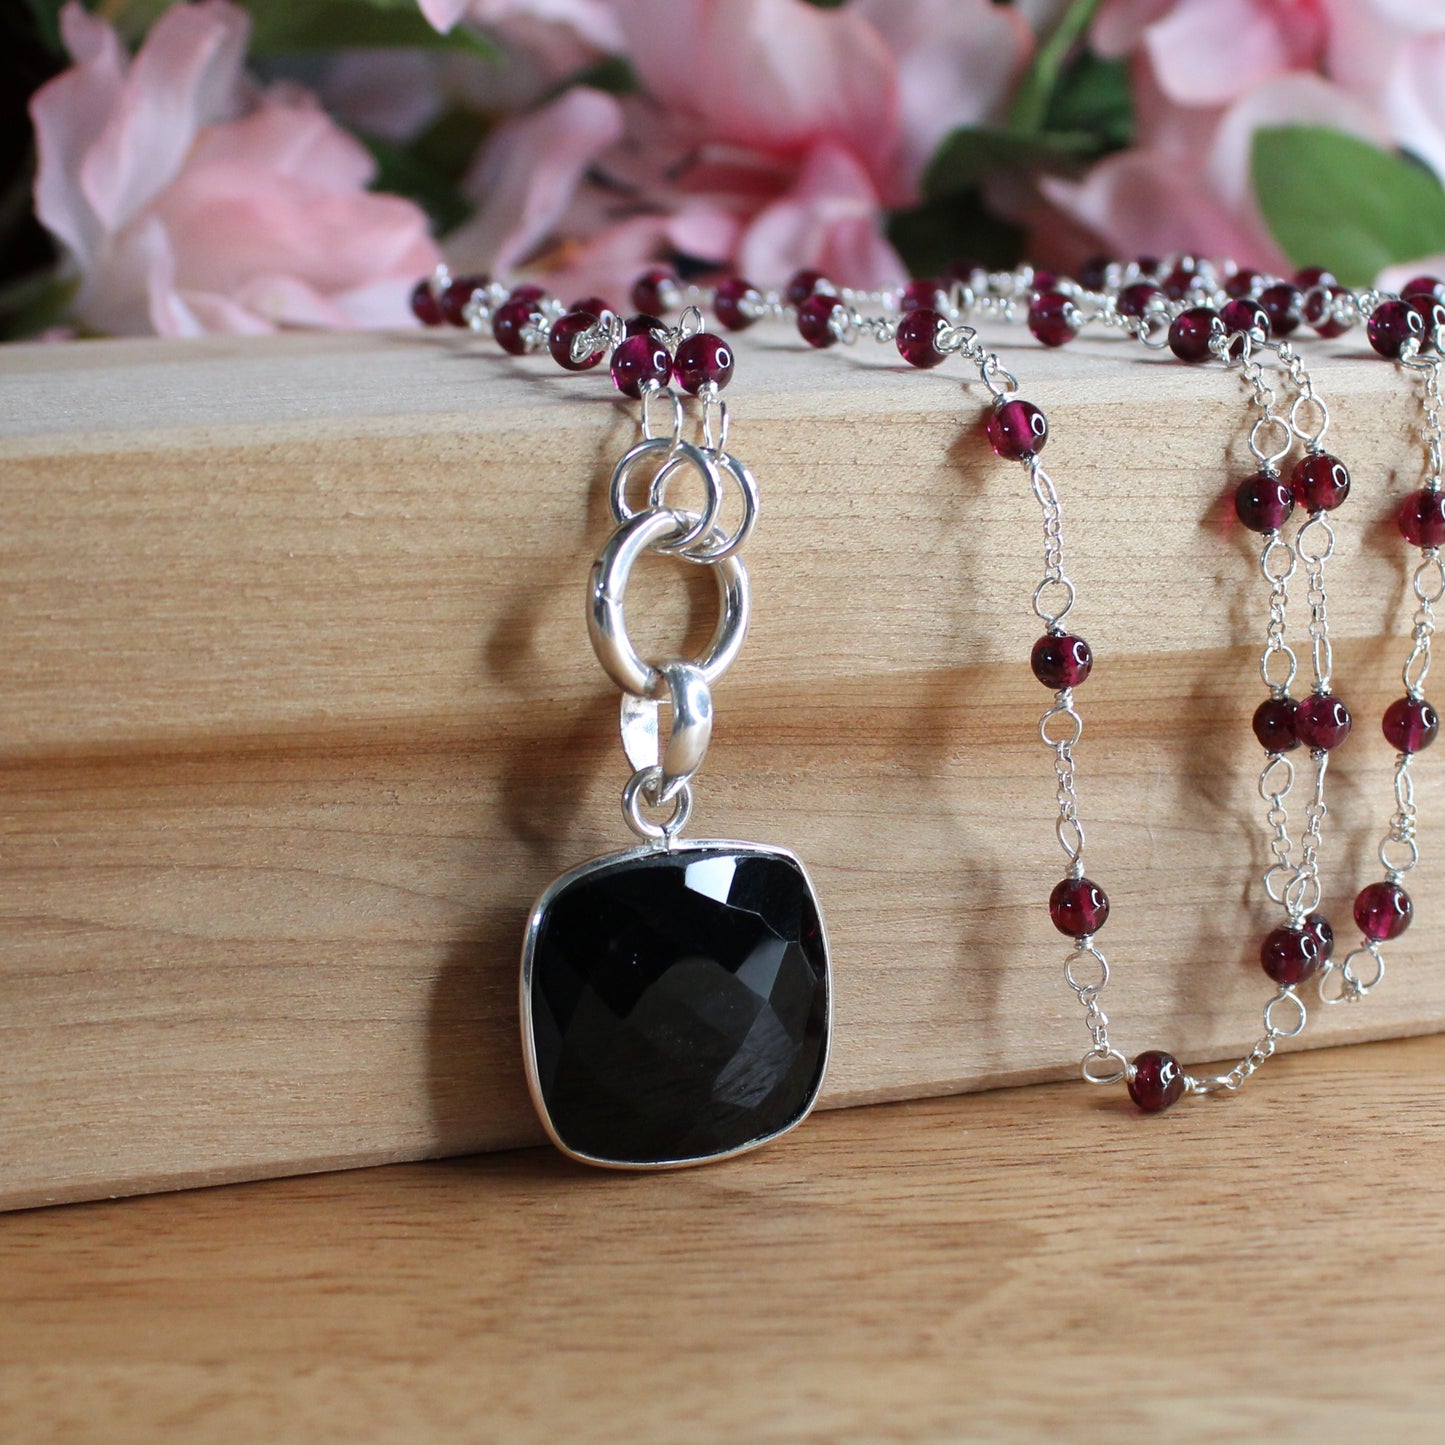 Black Onyx Square Facetted Pendant Charm